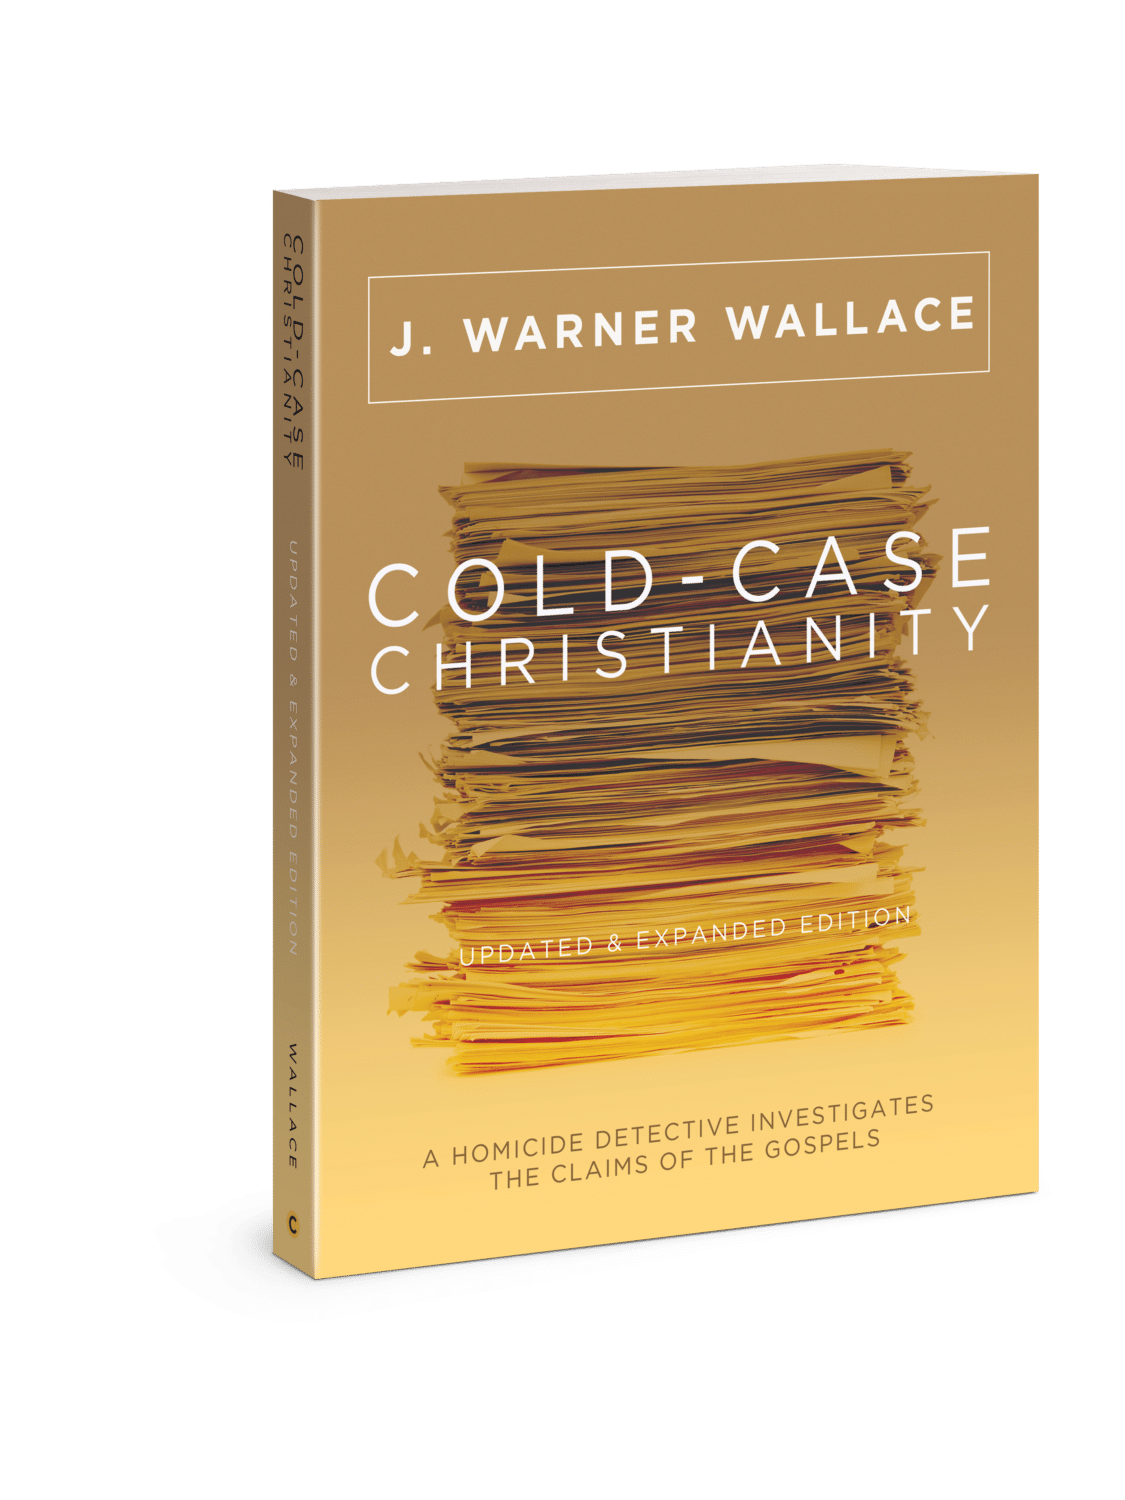 Cold-Case Christianity Expanded Edition book cover image